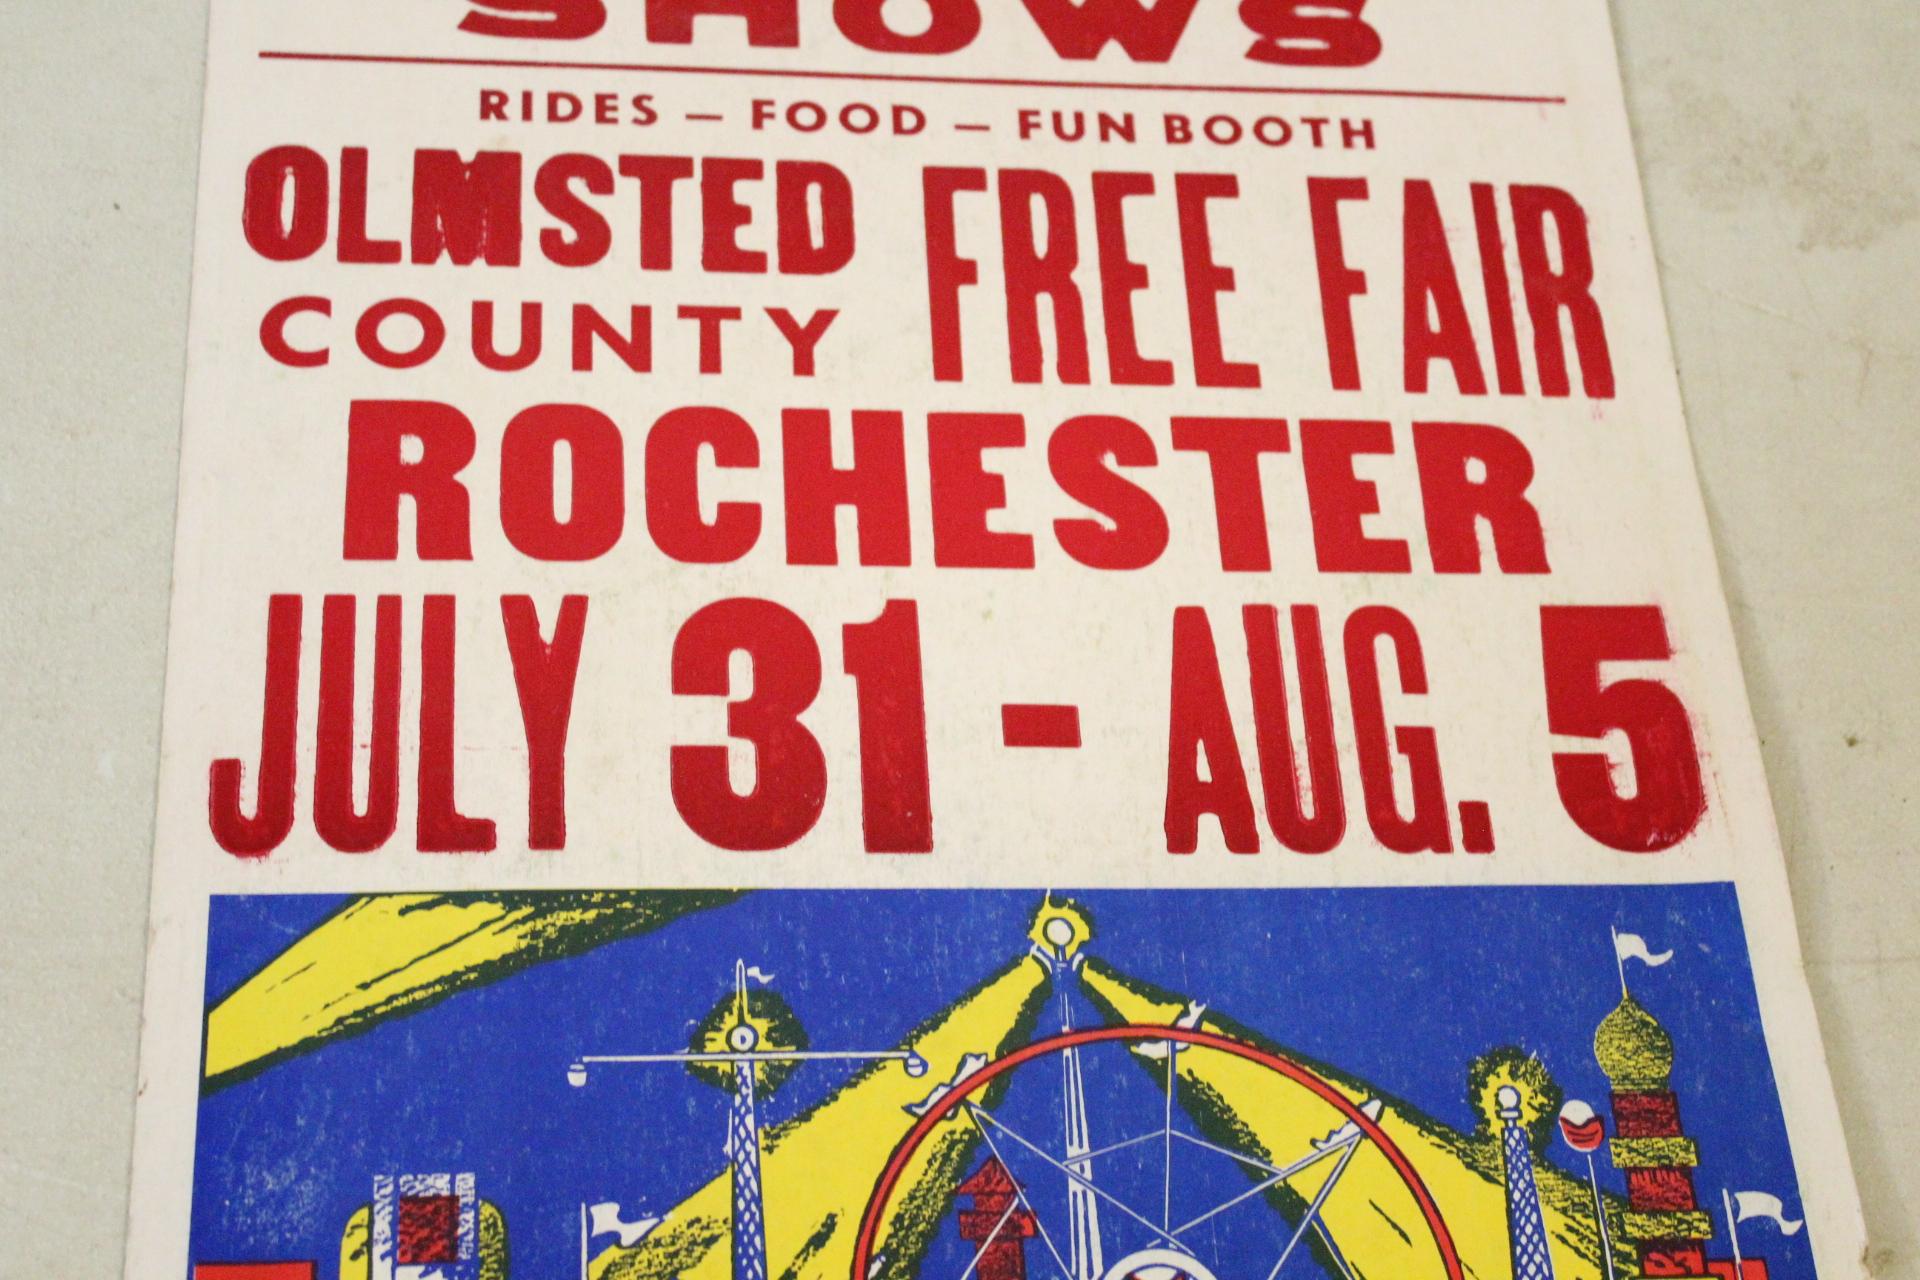 1978 Olmsted County Fair Poster 21.75" x 14"